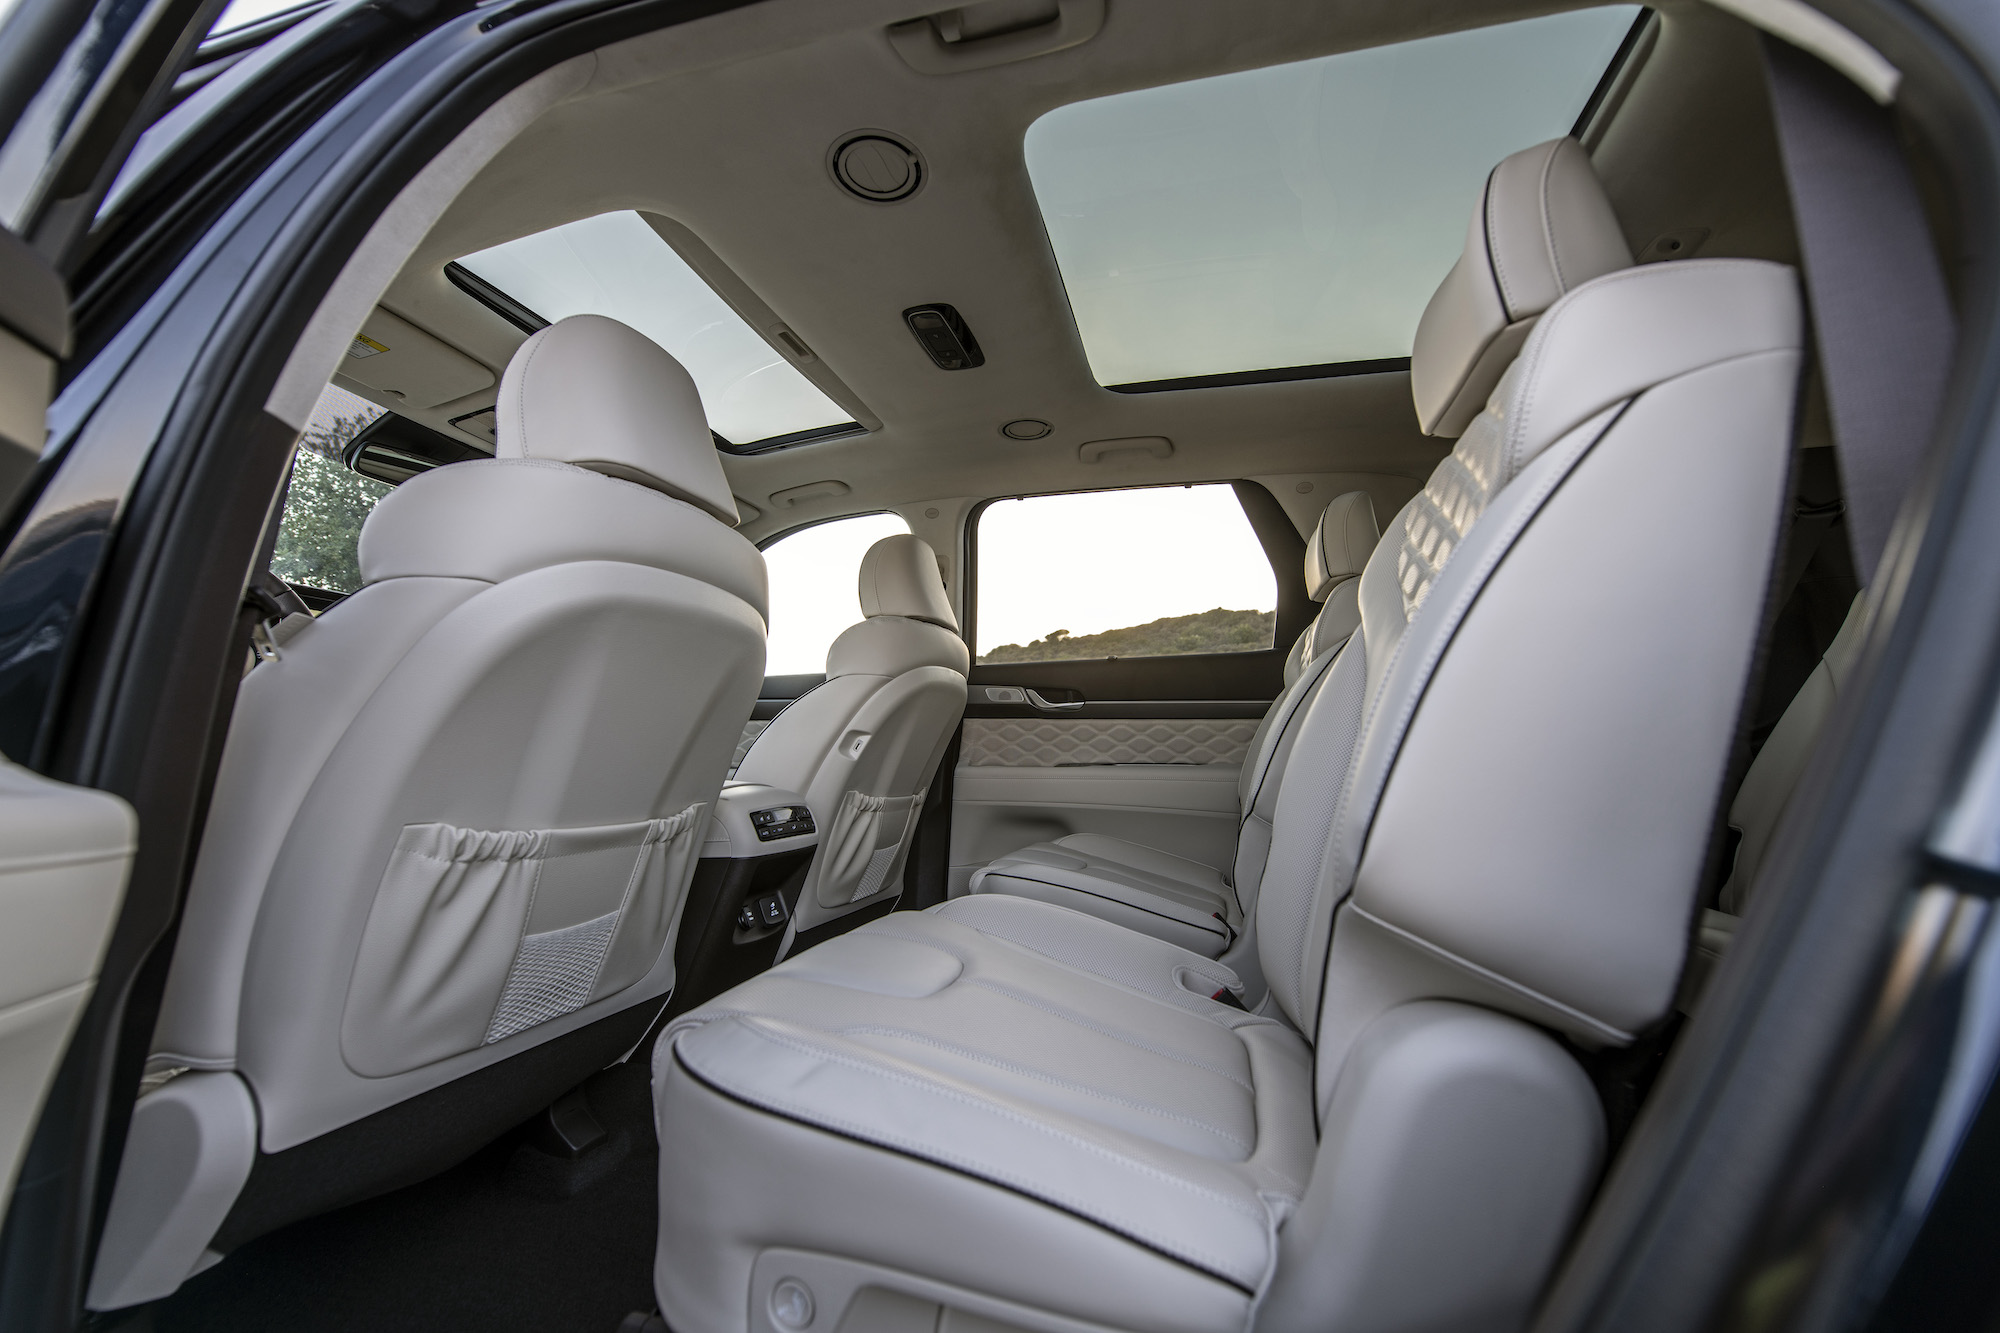 The interior of a 2021 Hyundai Palisade midsize crossover SUV with two moonroofs and quilted white leather seats